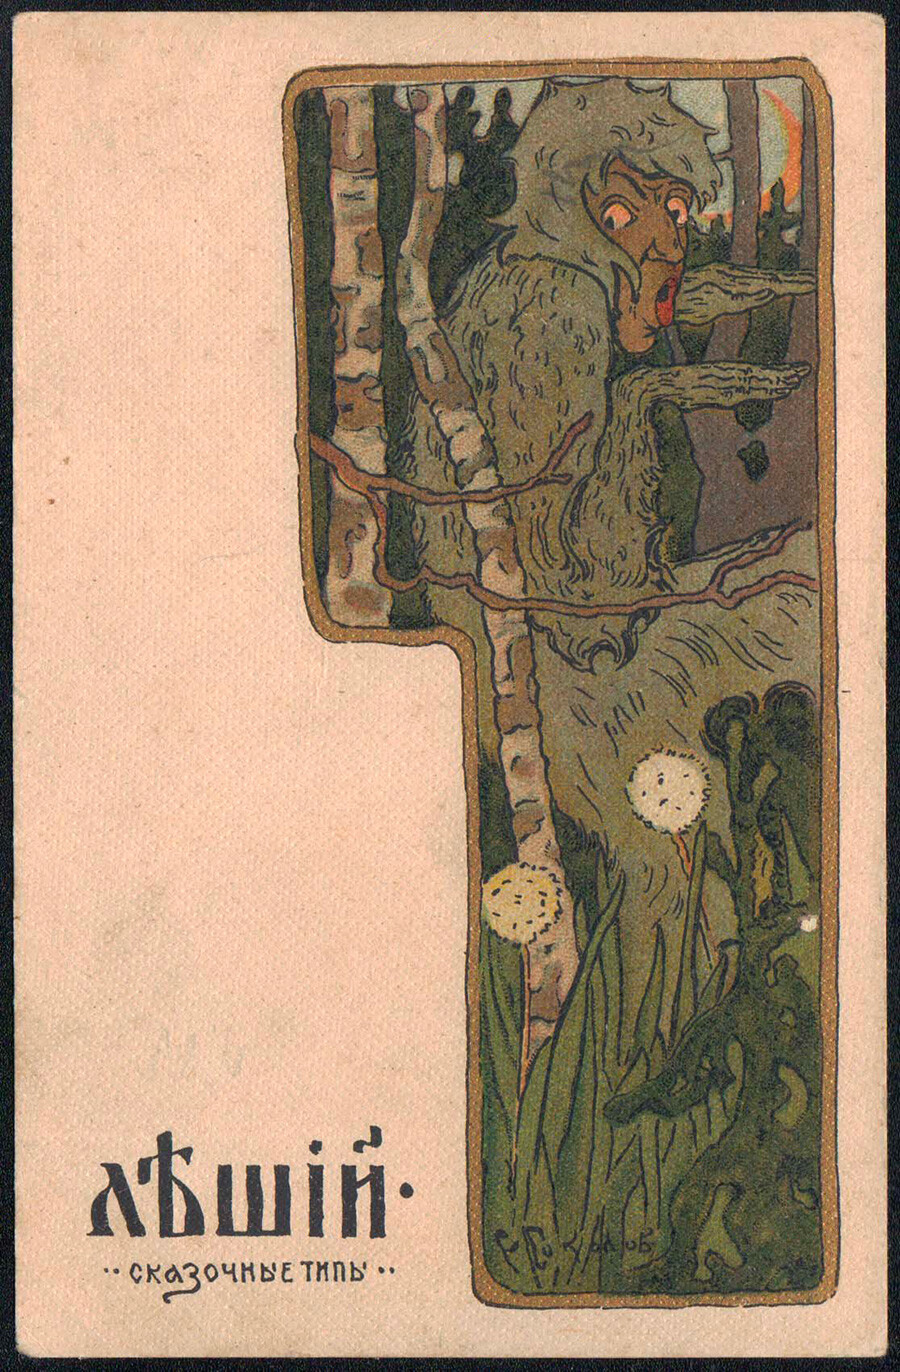 Leshy, another early 20th century drawing